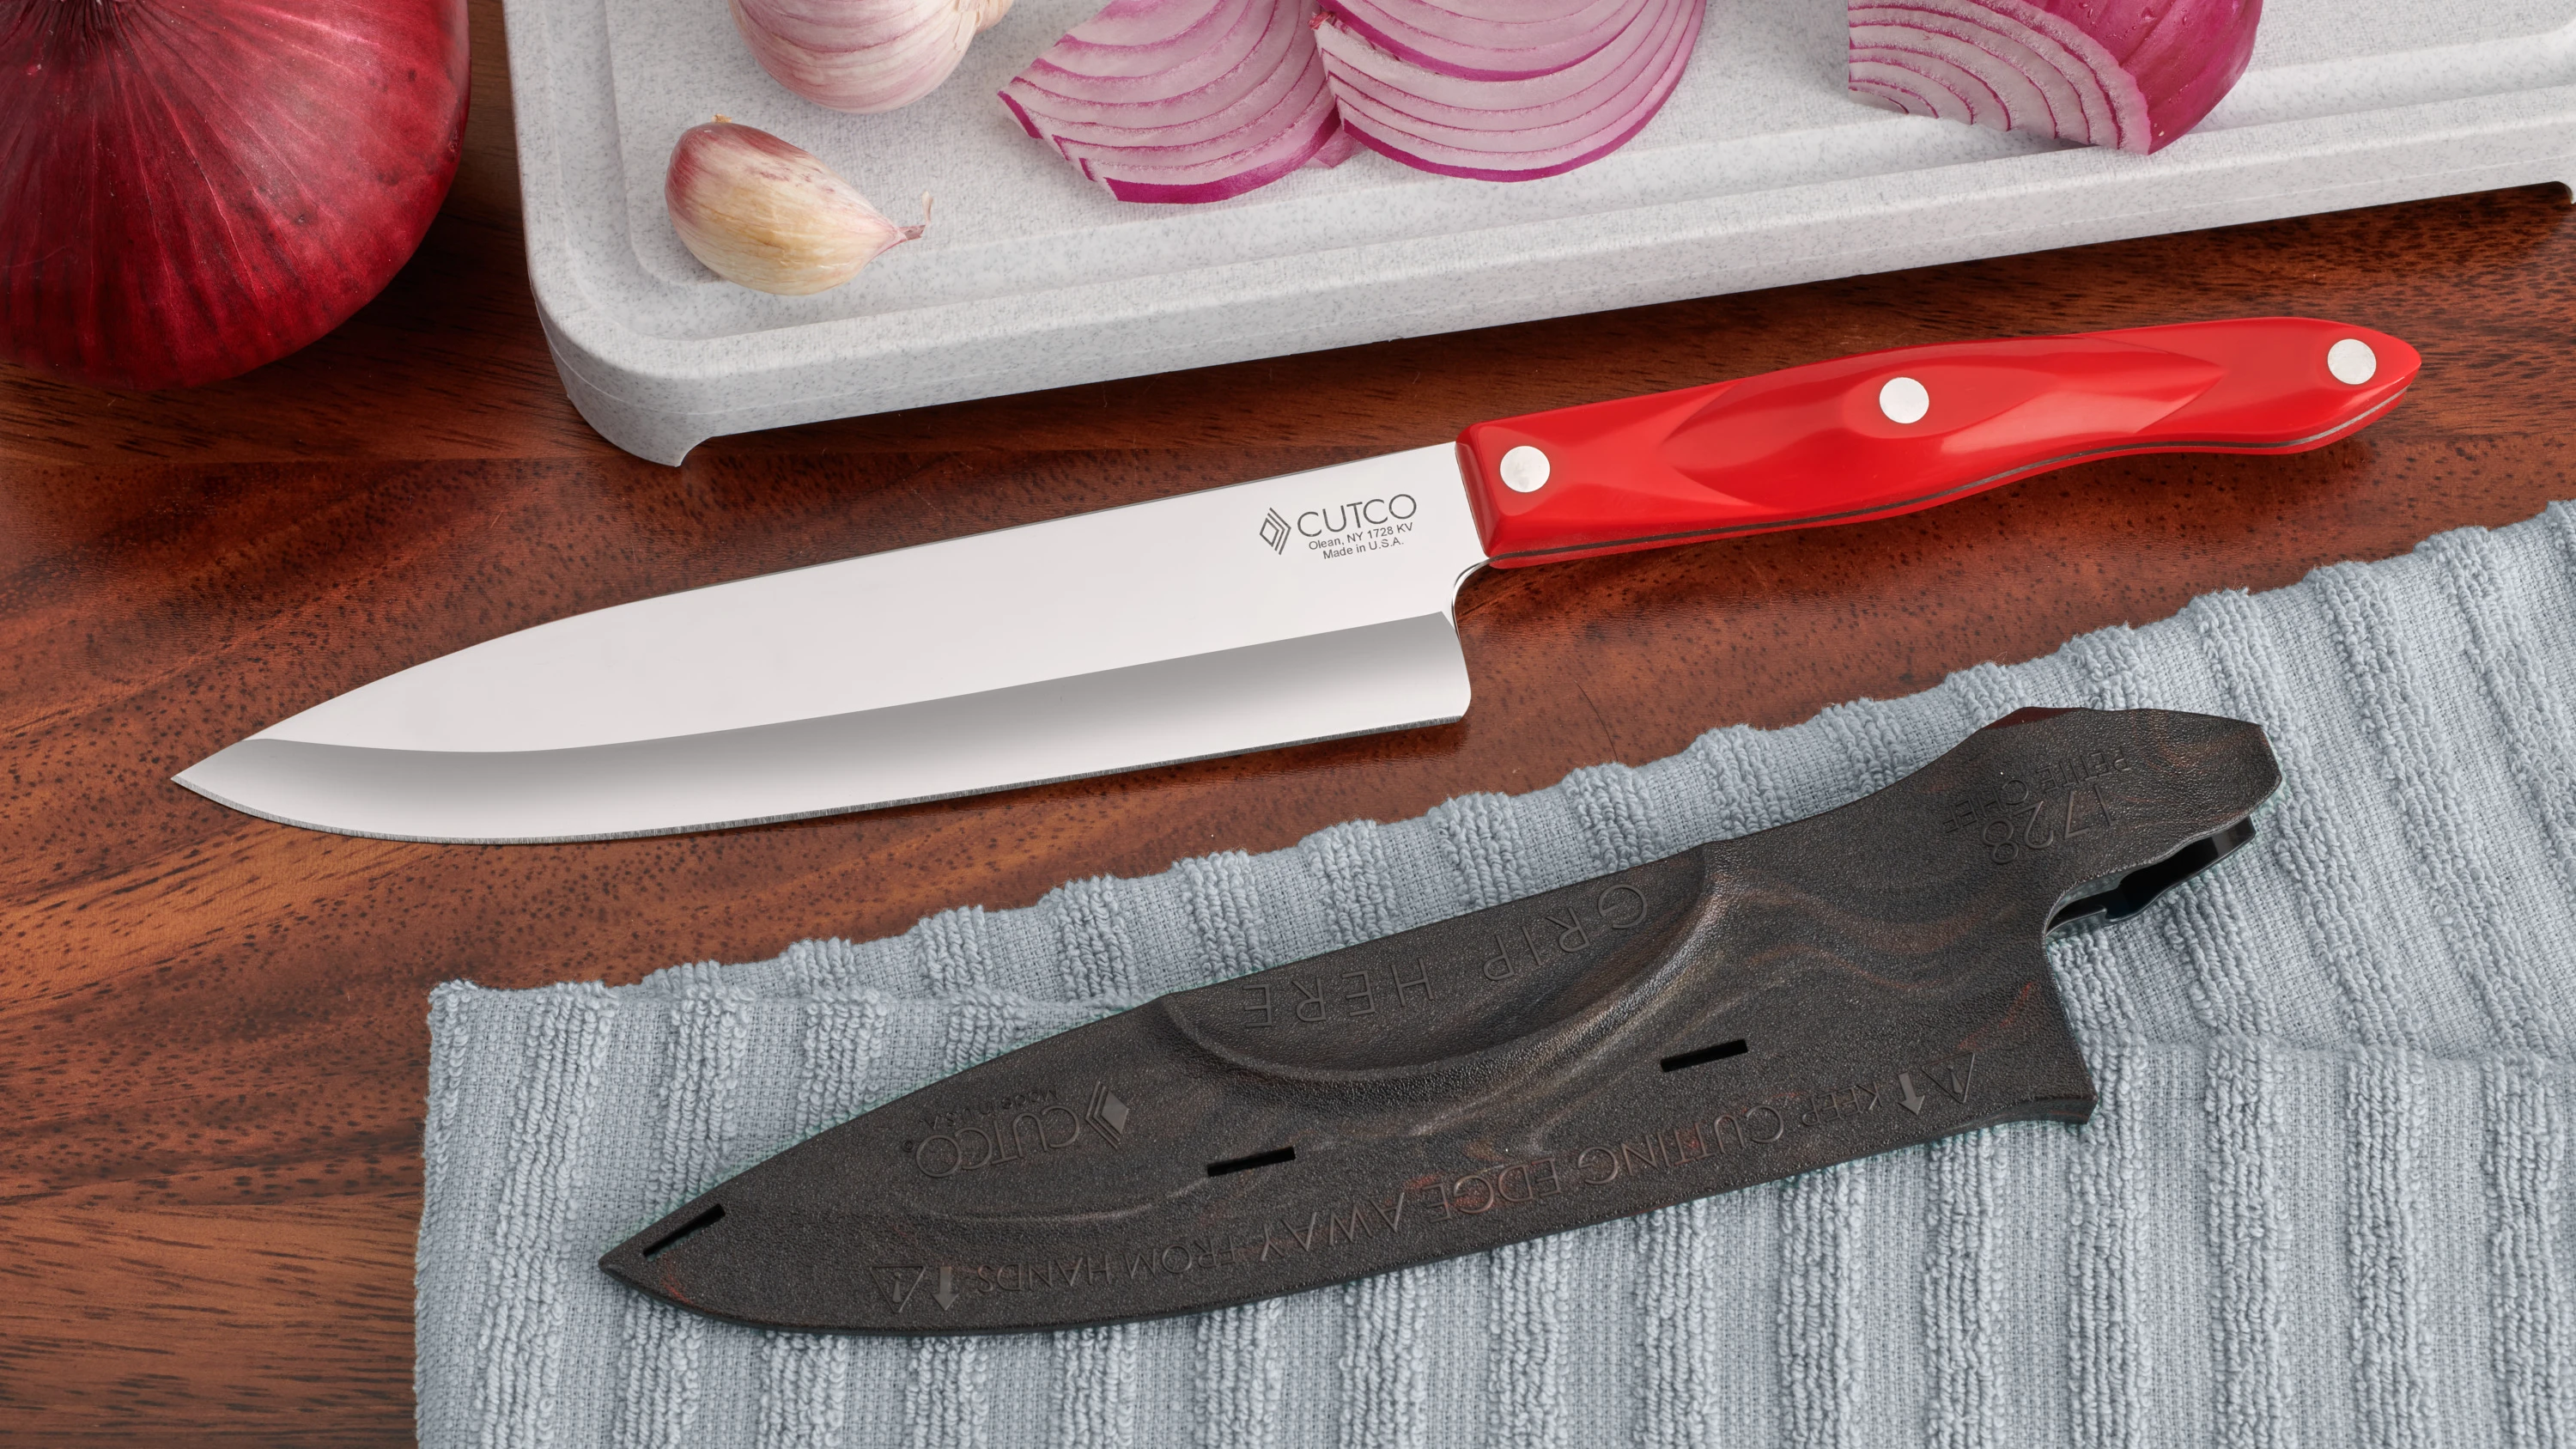 Time limit of 50% discount CUTCO 1728 KD PETITE CHEF KNIFE 7 5/8'' BLADE  MADE IN USA, cutco chef knives